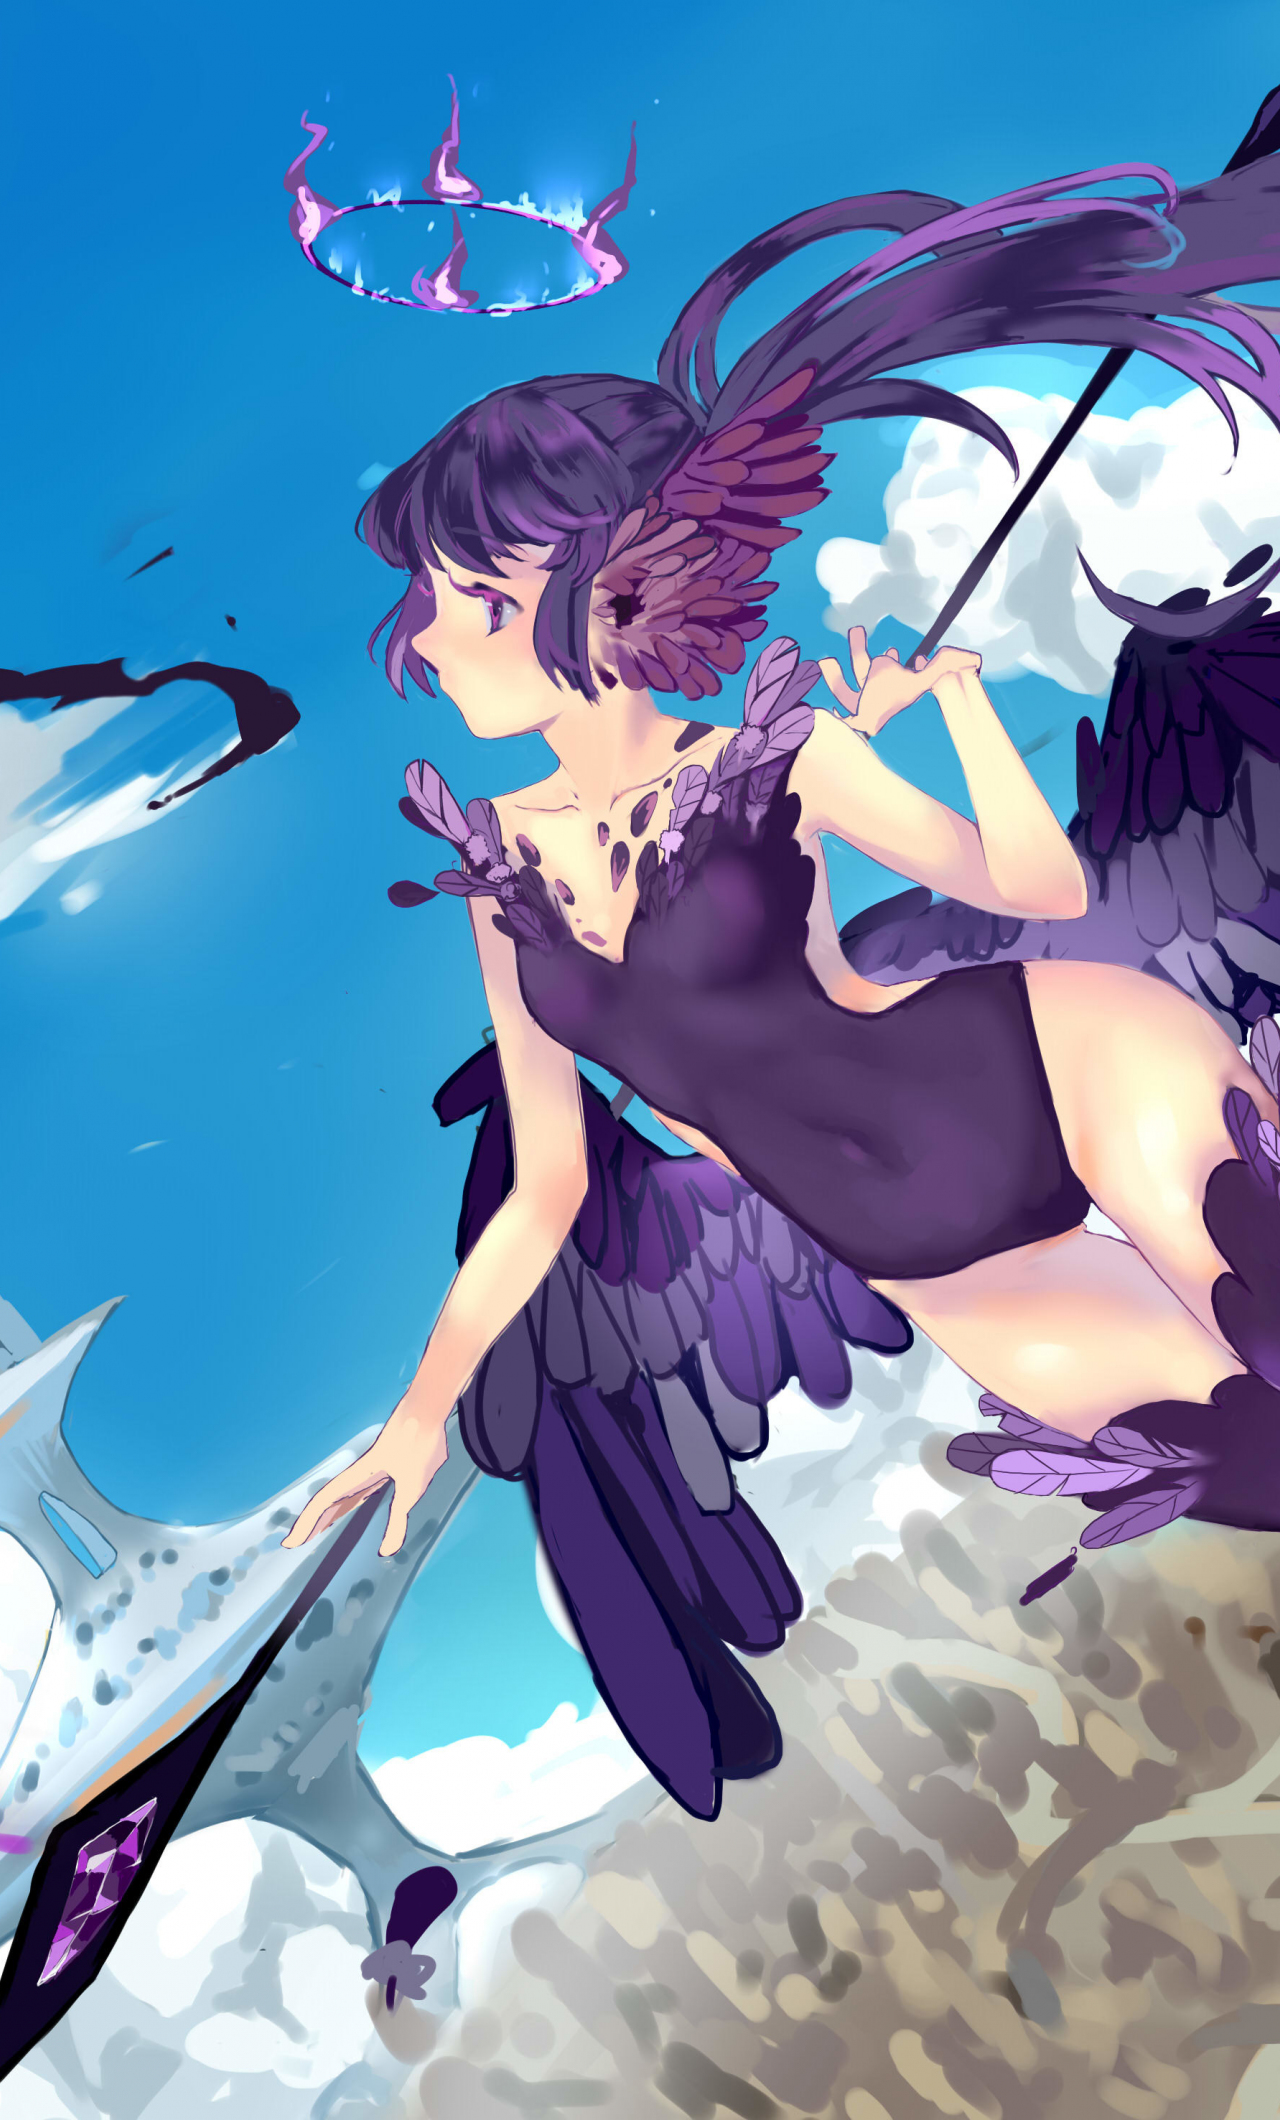 Anime Demon Angel Live Wallpaper Free Android Live Wallpaper download -  Download the Free Anime Demon Angel Live Wallpaper Live Wallpaper to your  Android phone or tablet